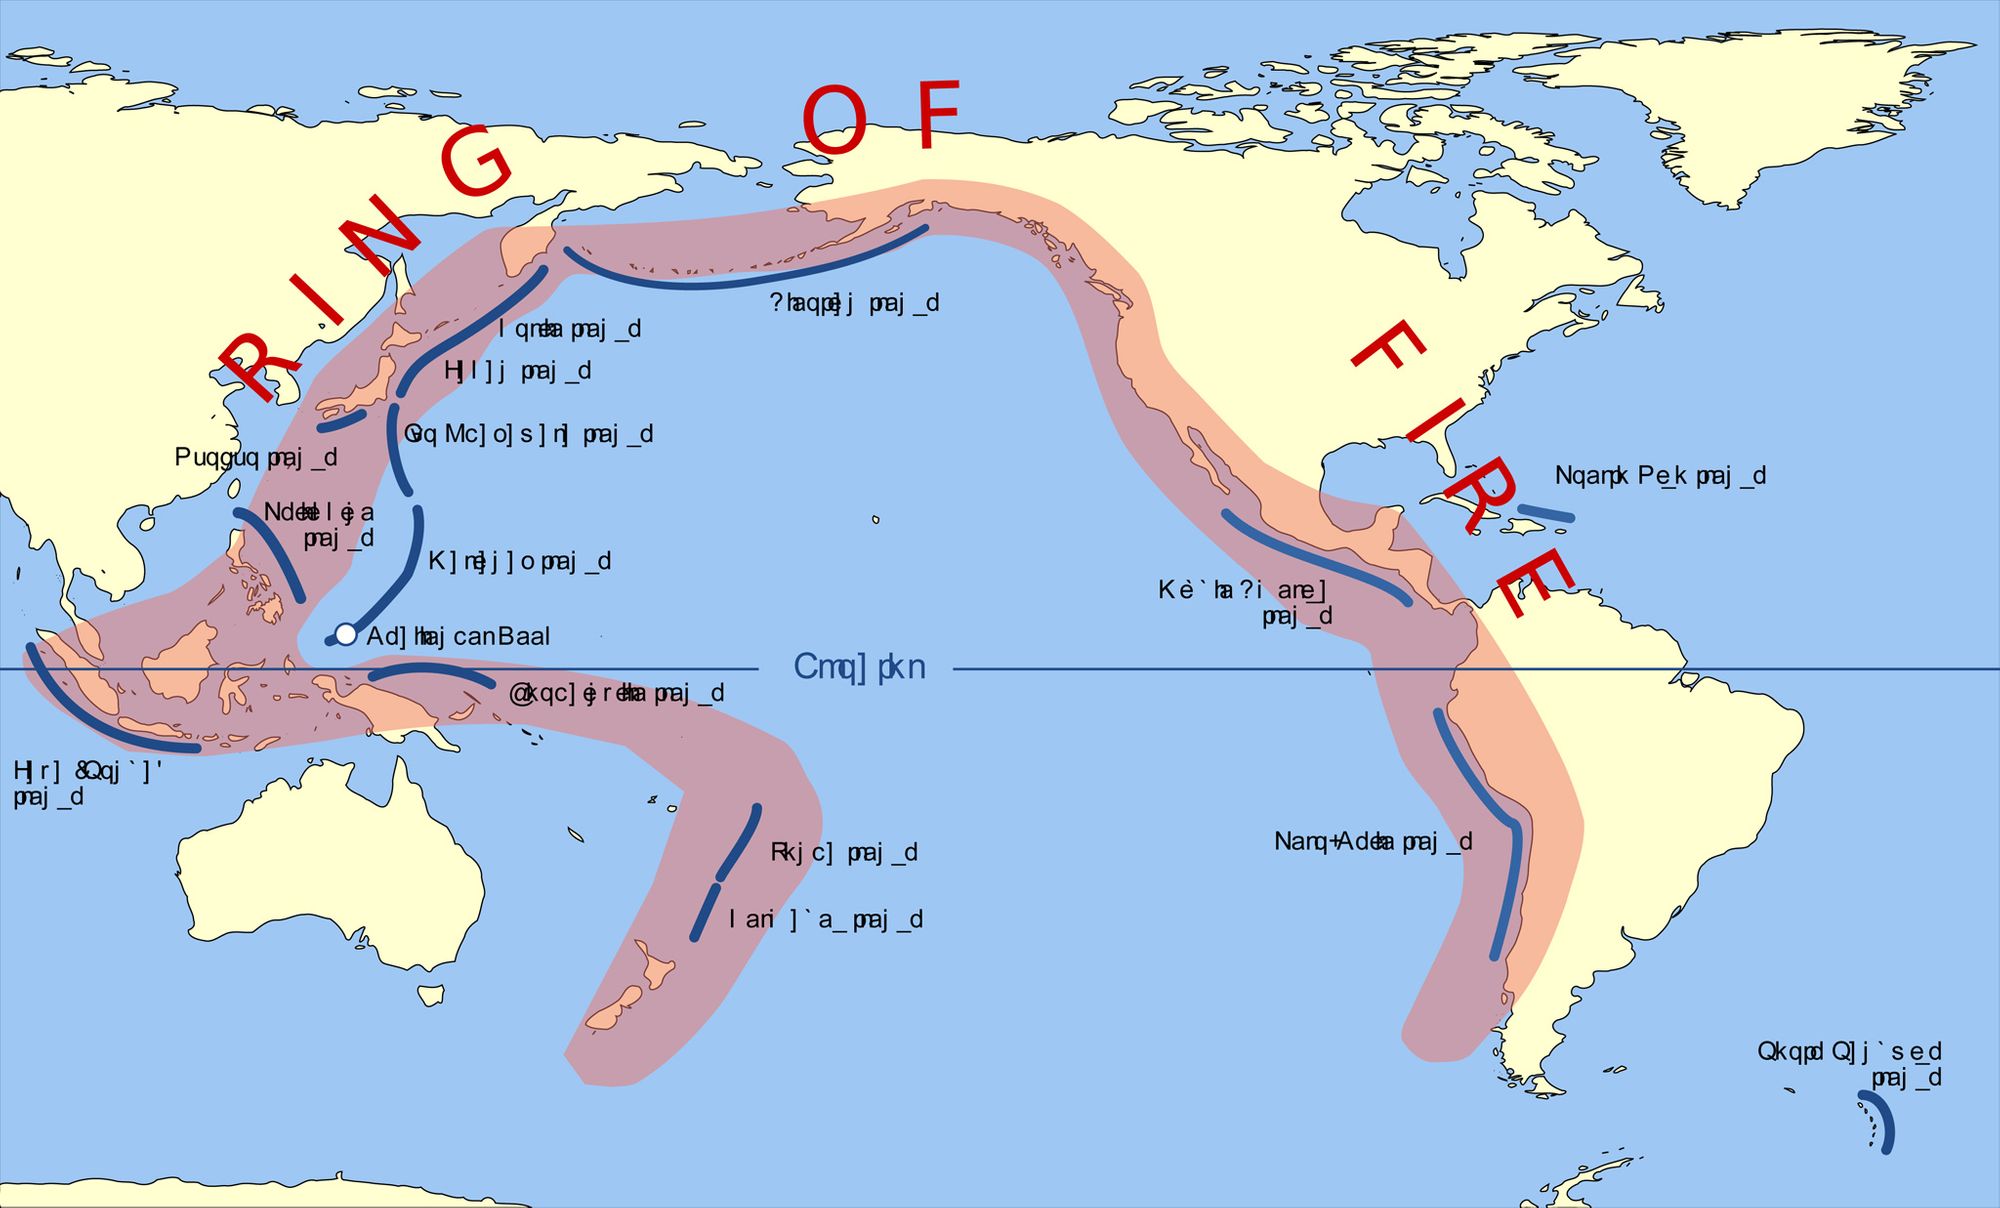 Pacific Ring of Fire. Source: Wikimedia Commons